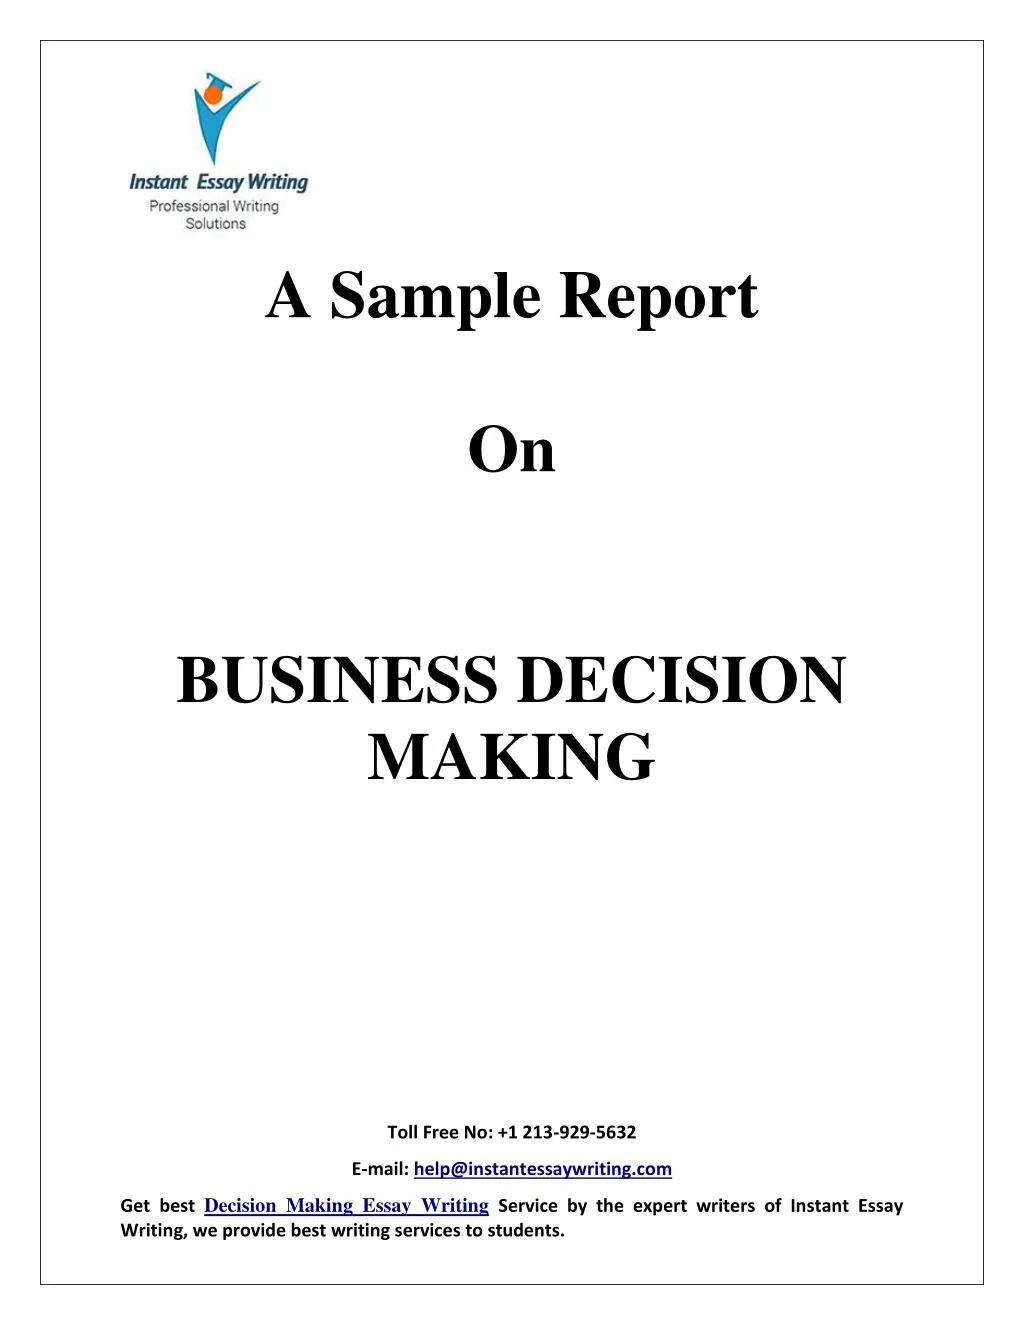 a sample report on business decision making